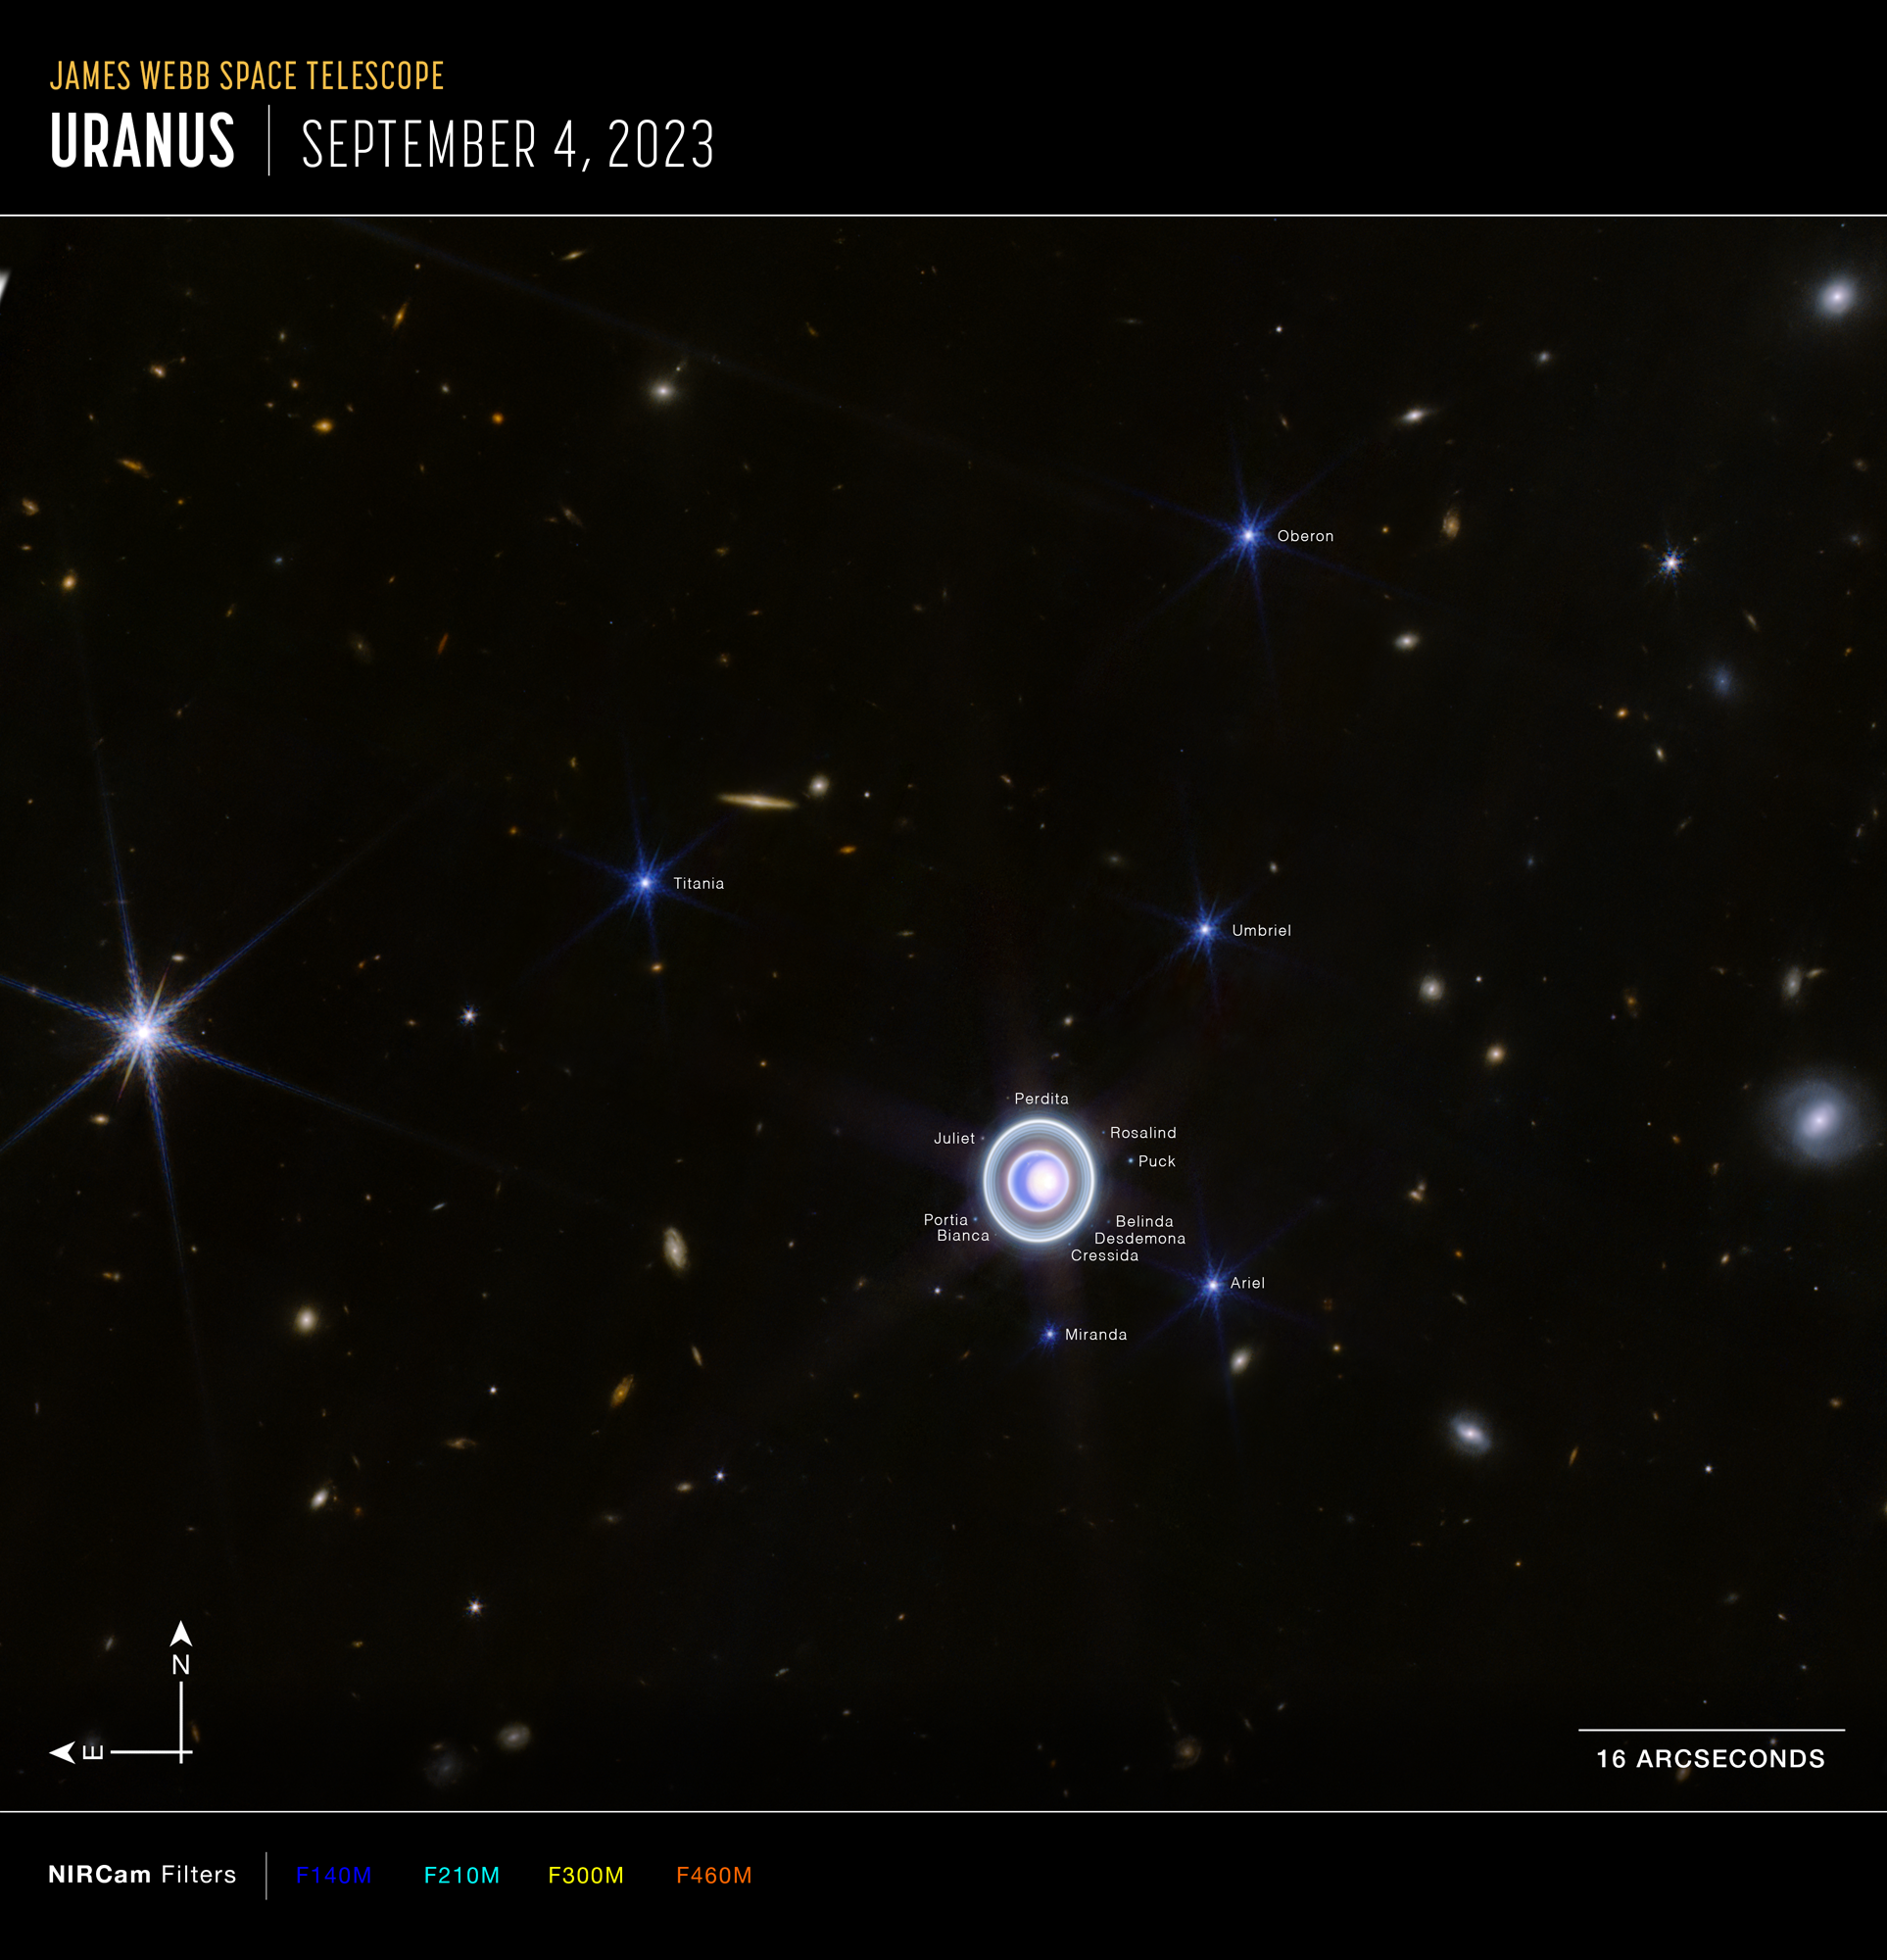 An image titled James Webb Space Telescope, Uranus, September 4, 2023. An image with a black background, a glowing orb near the center surrounded by rings. There are smudges that are background galaxies scattered throughout the image and several bright blue point sources that are the planet’s moons. At the bottom left are compass arrows indicating the orientation of the image on the sky. The north arrow points in the 12 o’clock direction. The east arrow points toward 6 o’clock. Below the image is a color key showing which filters were used to create the image and which visible-light color is assigned to each infrared-light filter. From left to right, Webb NIRCam filters are F140M (blue), F210M (cyan), F300M (yellow), and F460M (orange). A scale bar at the lower right of the image is about one-seventh the total width of the image, and text below it reads 16 arcseconds.